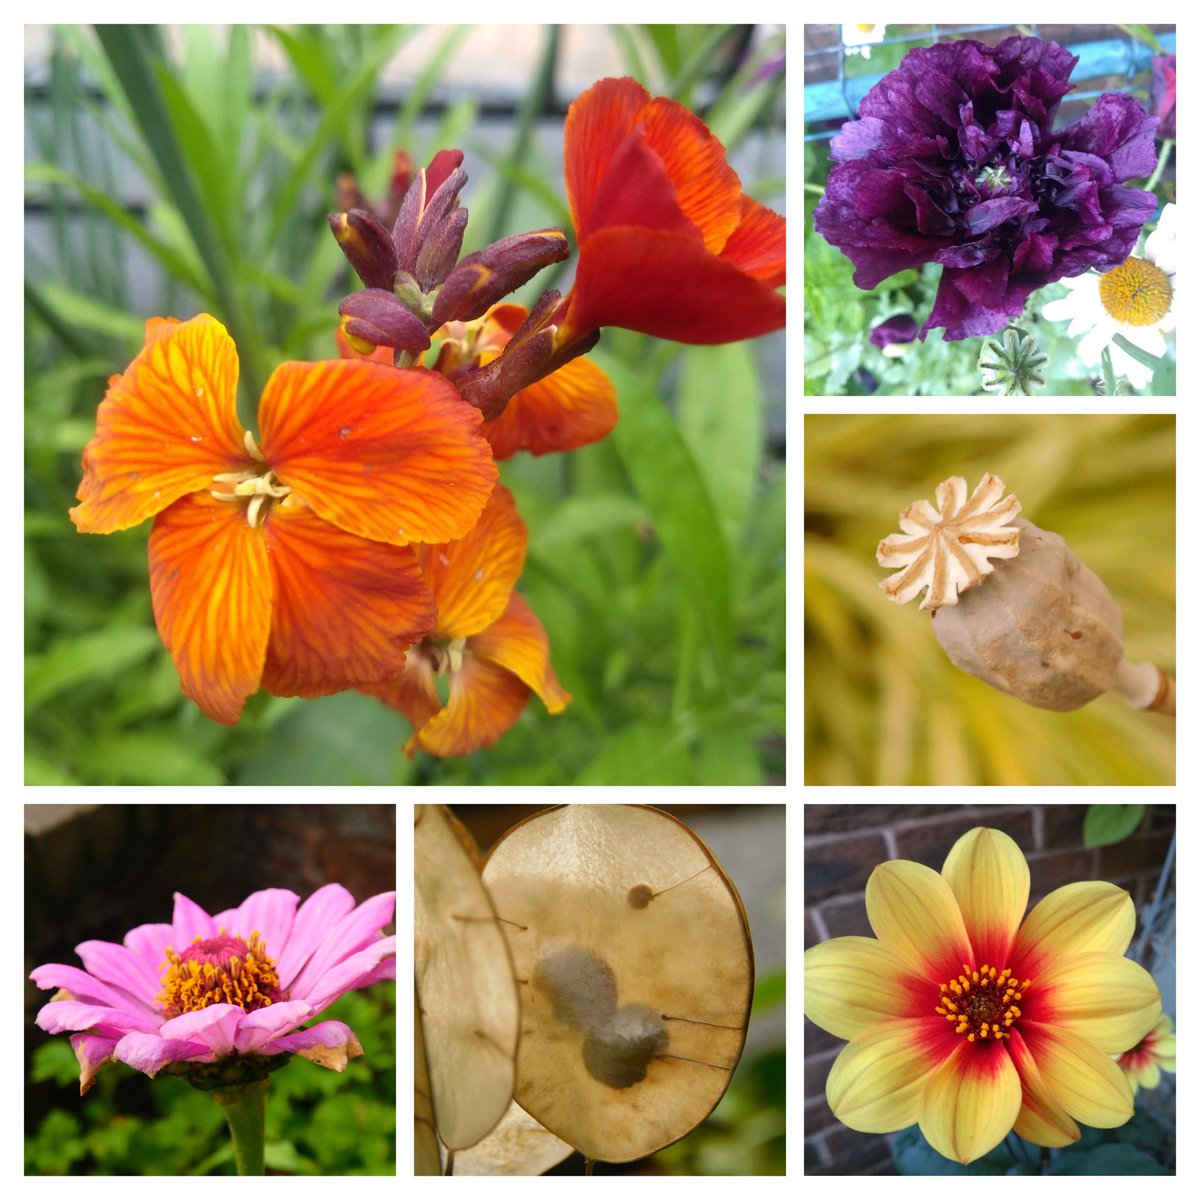 #FlowersOnFriday looking back at some of the tuber/ seed-sown flowers I've grown on #MyBalcony over spring & summer 🌱🌱 looking forward to seeing what selfseeders I'll have next year 😀